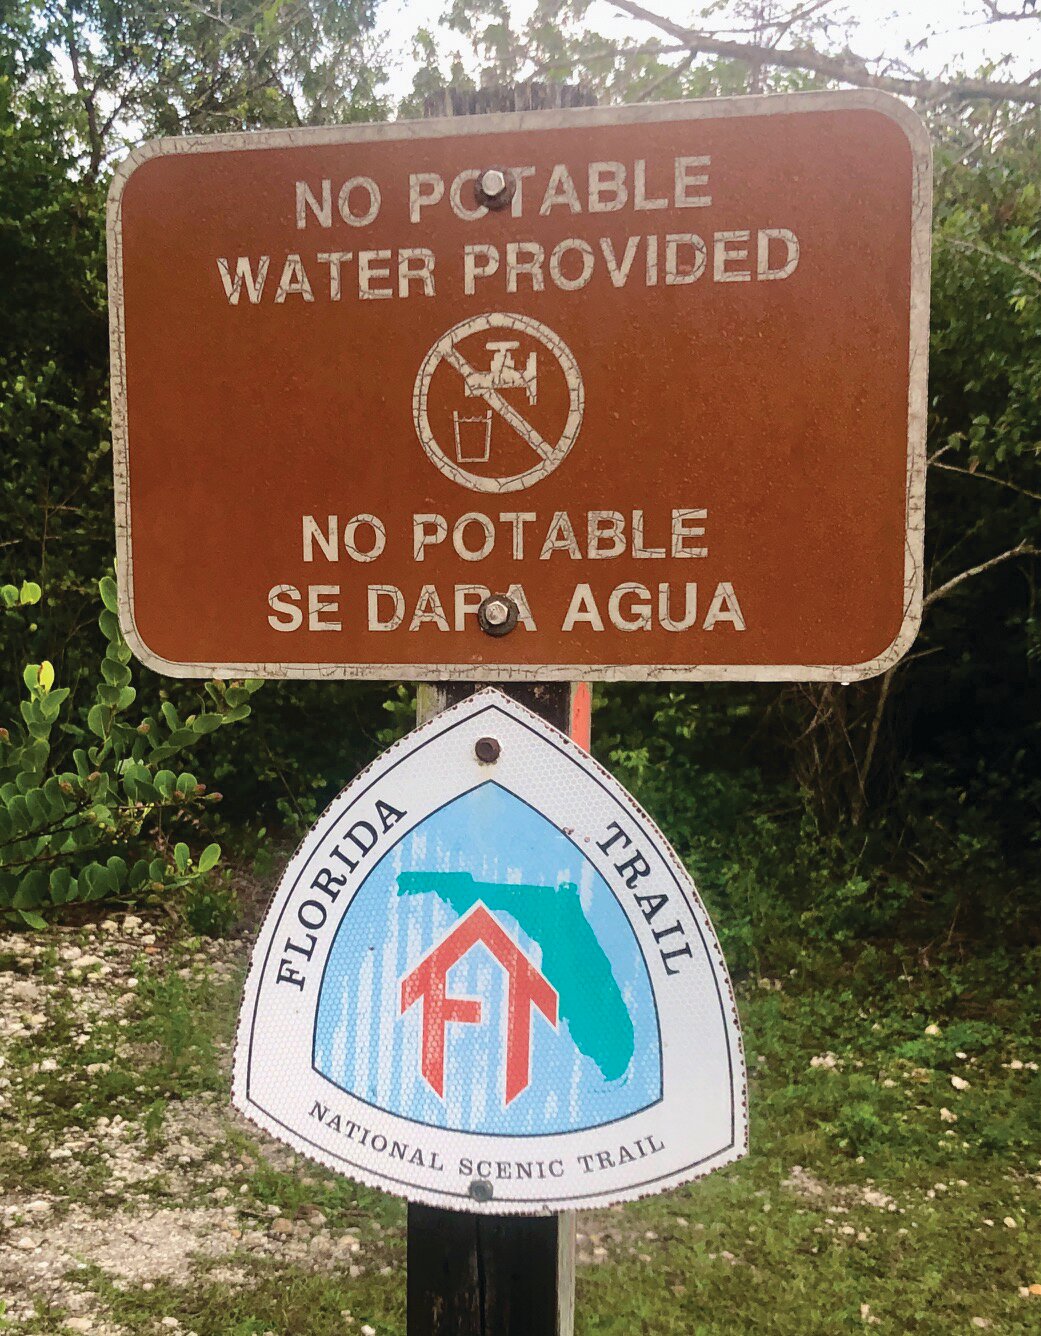 Hikers must carry special water filters on the entire Trail, which is especially important in the swamps of the Big Cypress National Preserve.